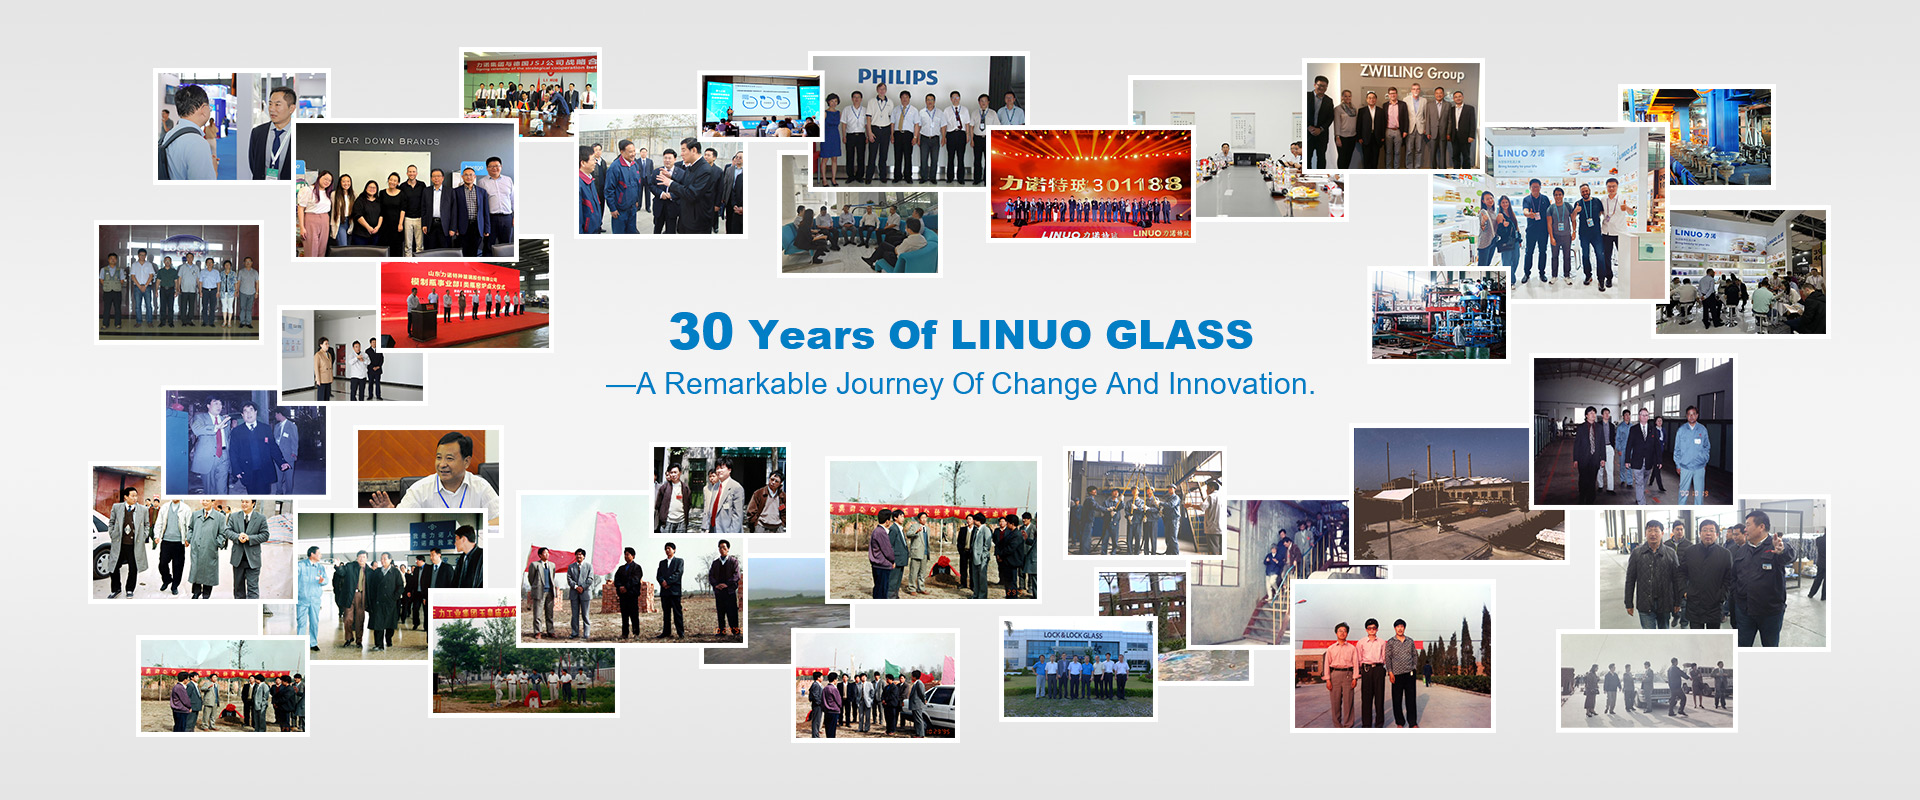 30 Years Of LINUO GLASS—A Remarkable Journey Of Change And Innovation.